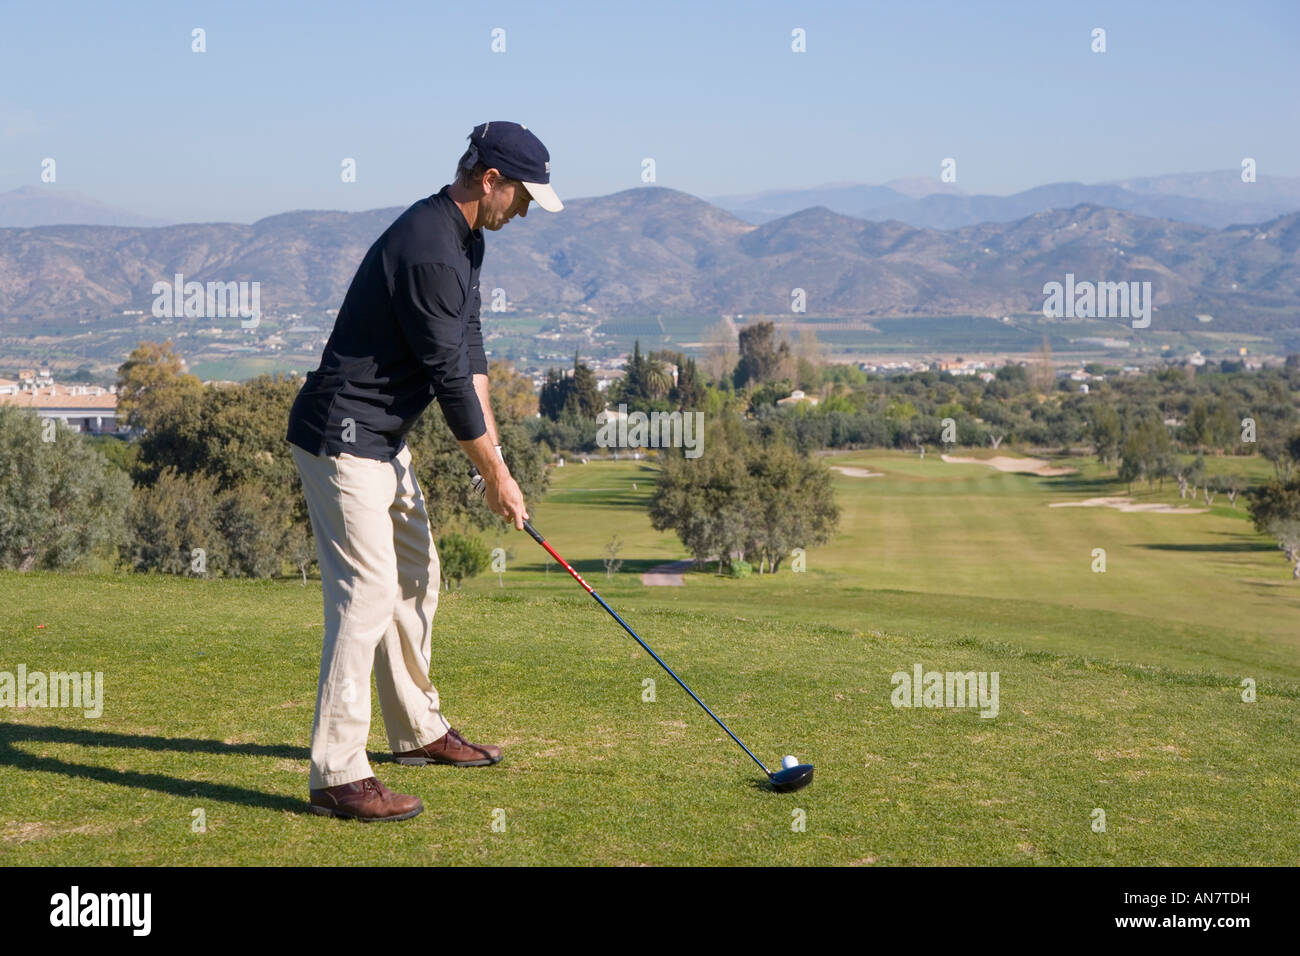 Alhaurin de la Torre Malaga Lauro Golf course Addressing the ball before driving from a tee Stock Photo